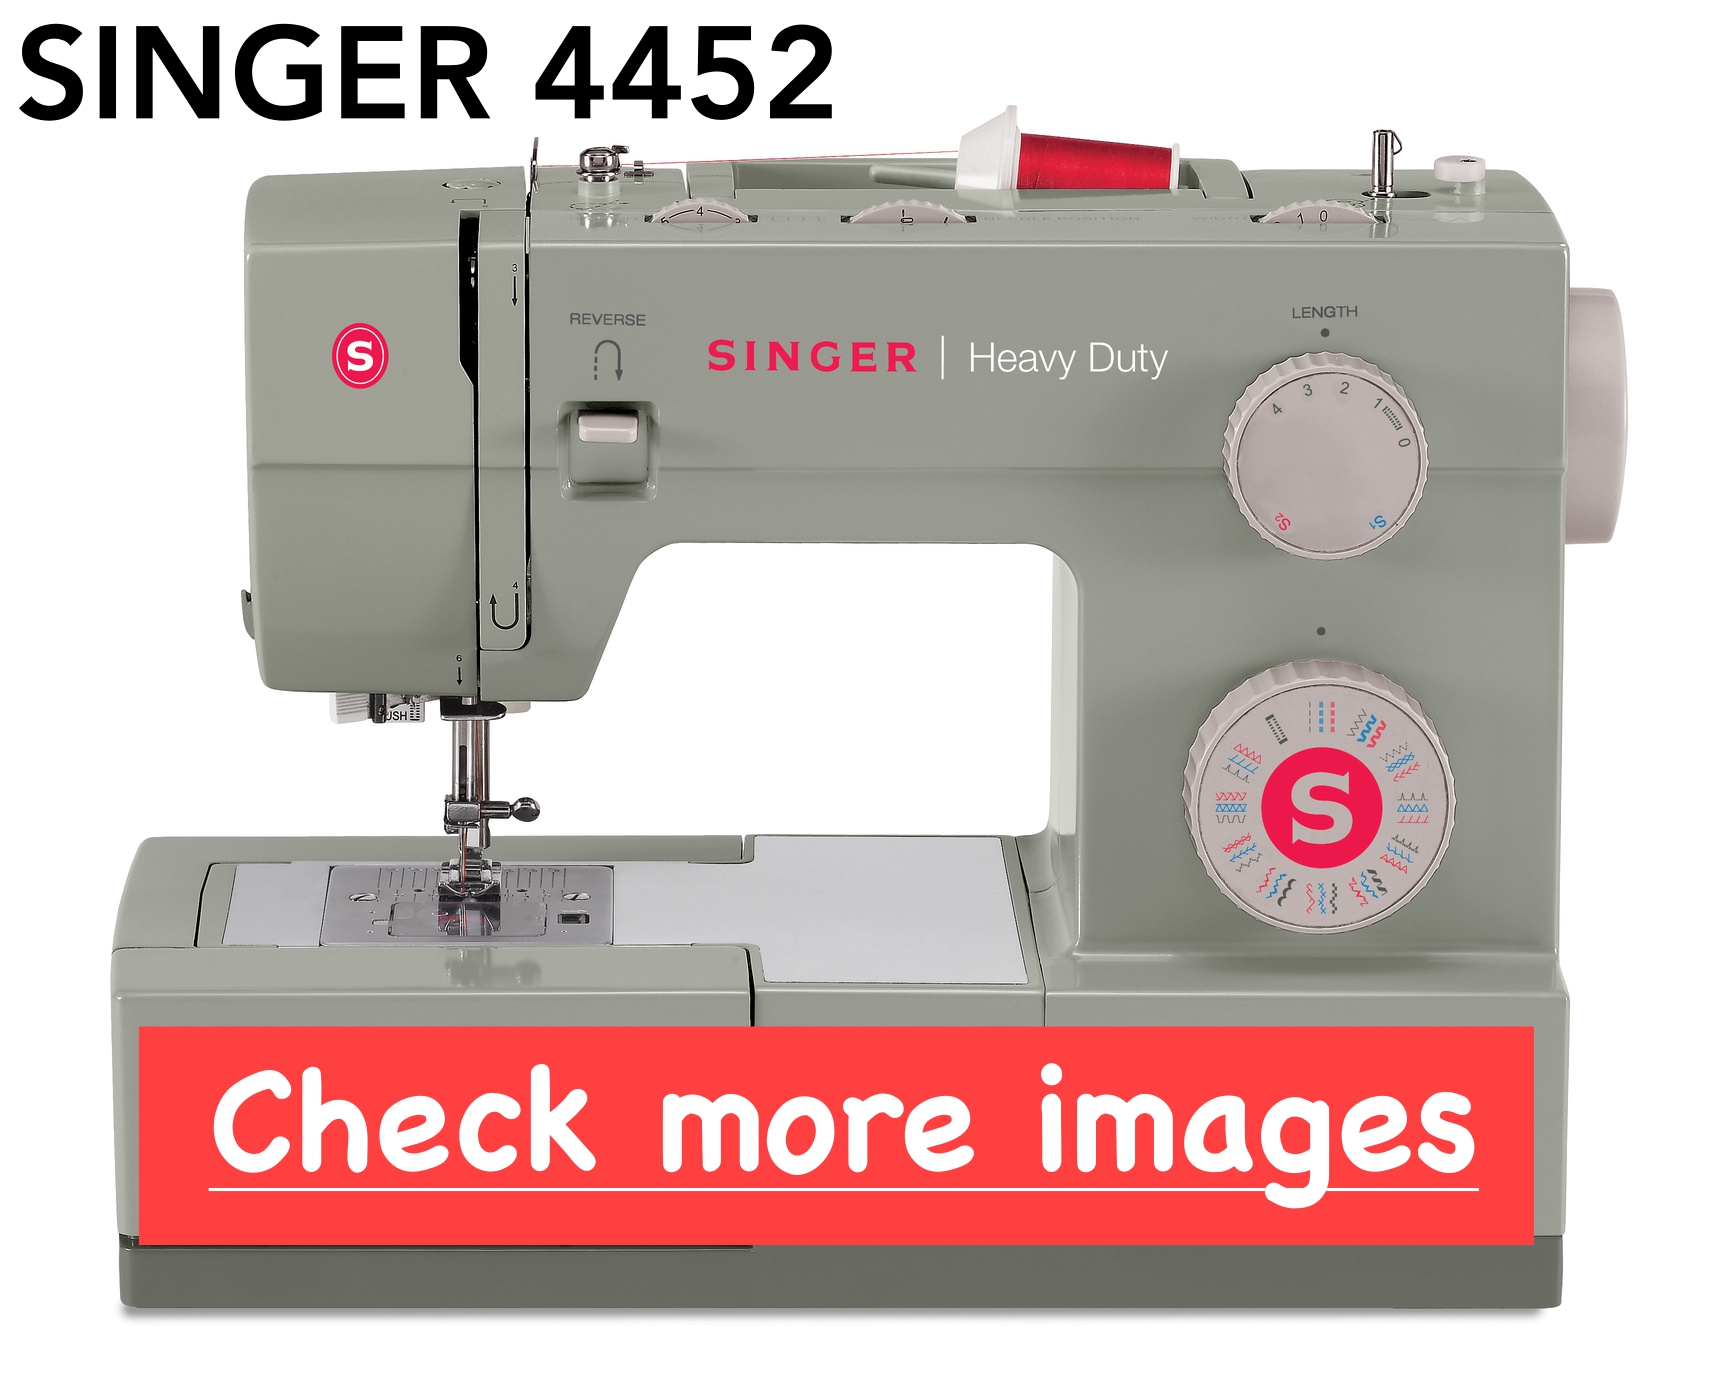 SINGER 4452 Heavy duty sewing machine review